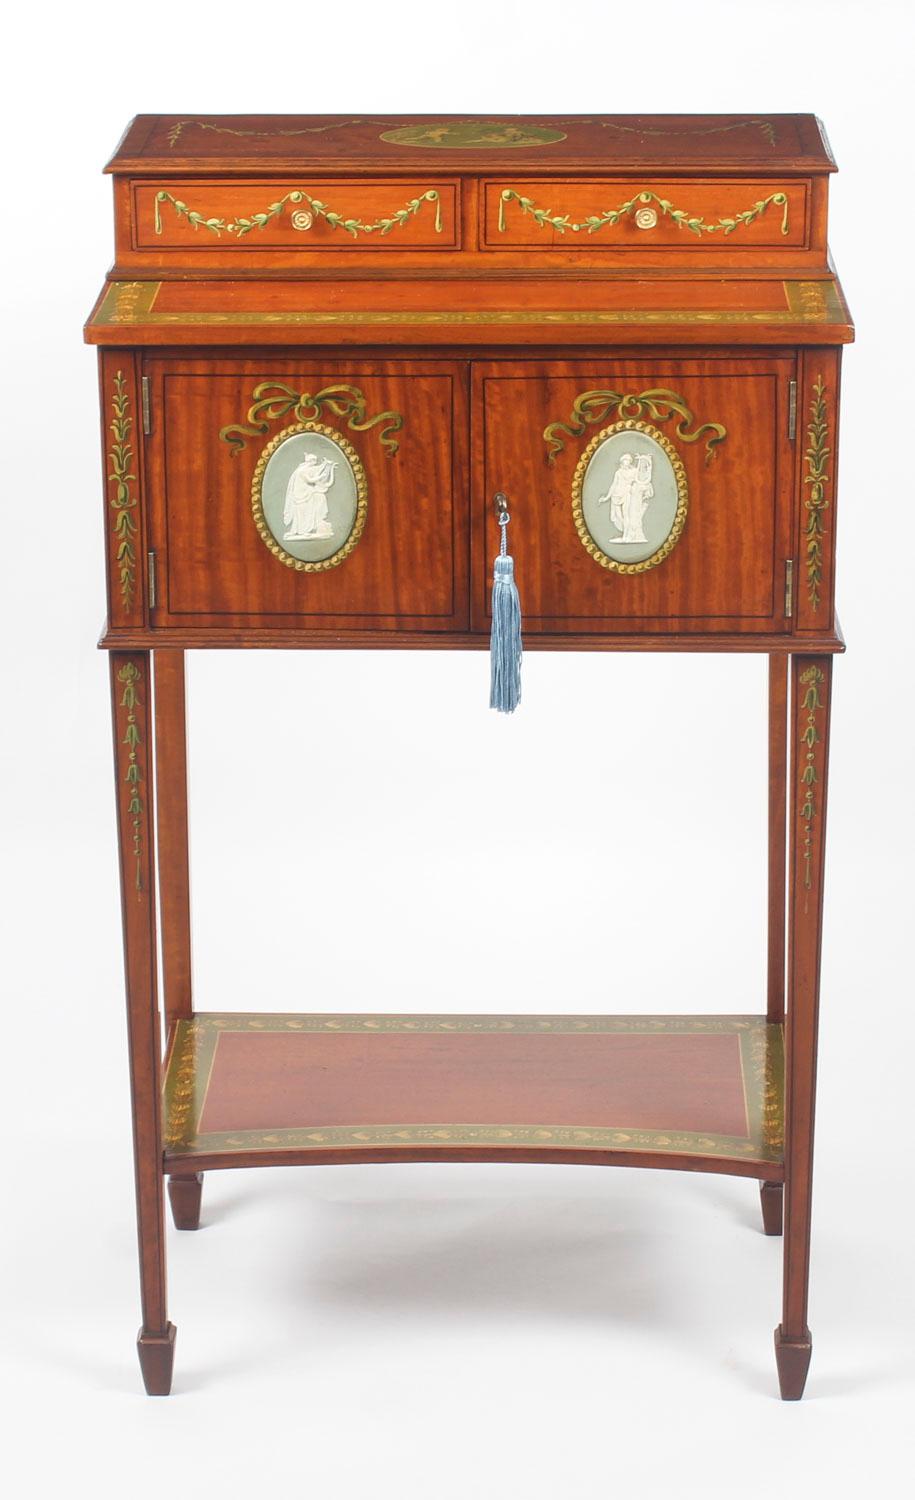 A beautiful antique George III freestanding satinwood cheveret, early 19th century in date.

This superb piece features attractive hand painted decoration of garlands, ribbons and bell flowers, in the manner of Angelica Kauffman, with green oval